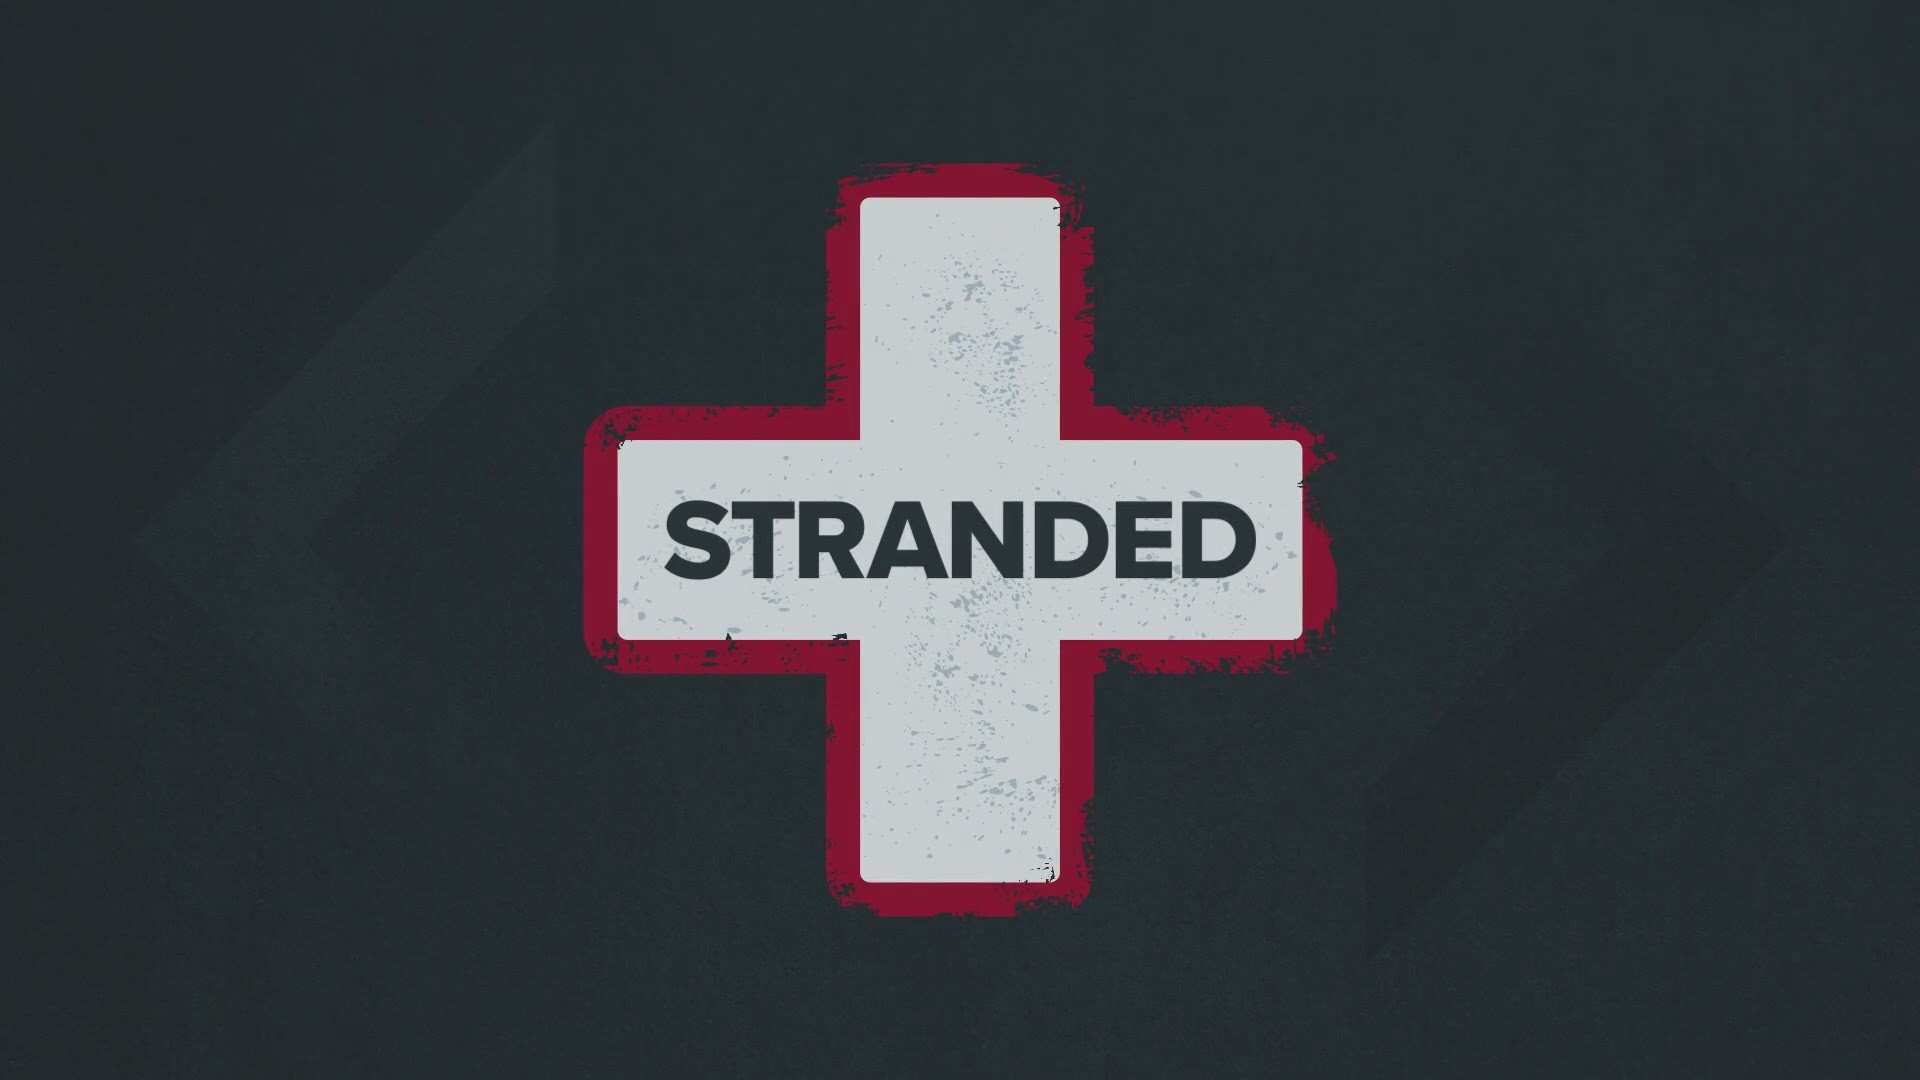 Stranded people in hospitals is a growing problem with no simple solution. At-risk adults have been abandoned and left in hospitals, care centers, or - in one instance - DIA. 9Wants to Know has shed light on this hidden issue.